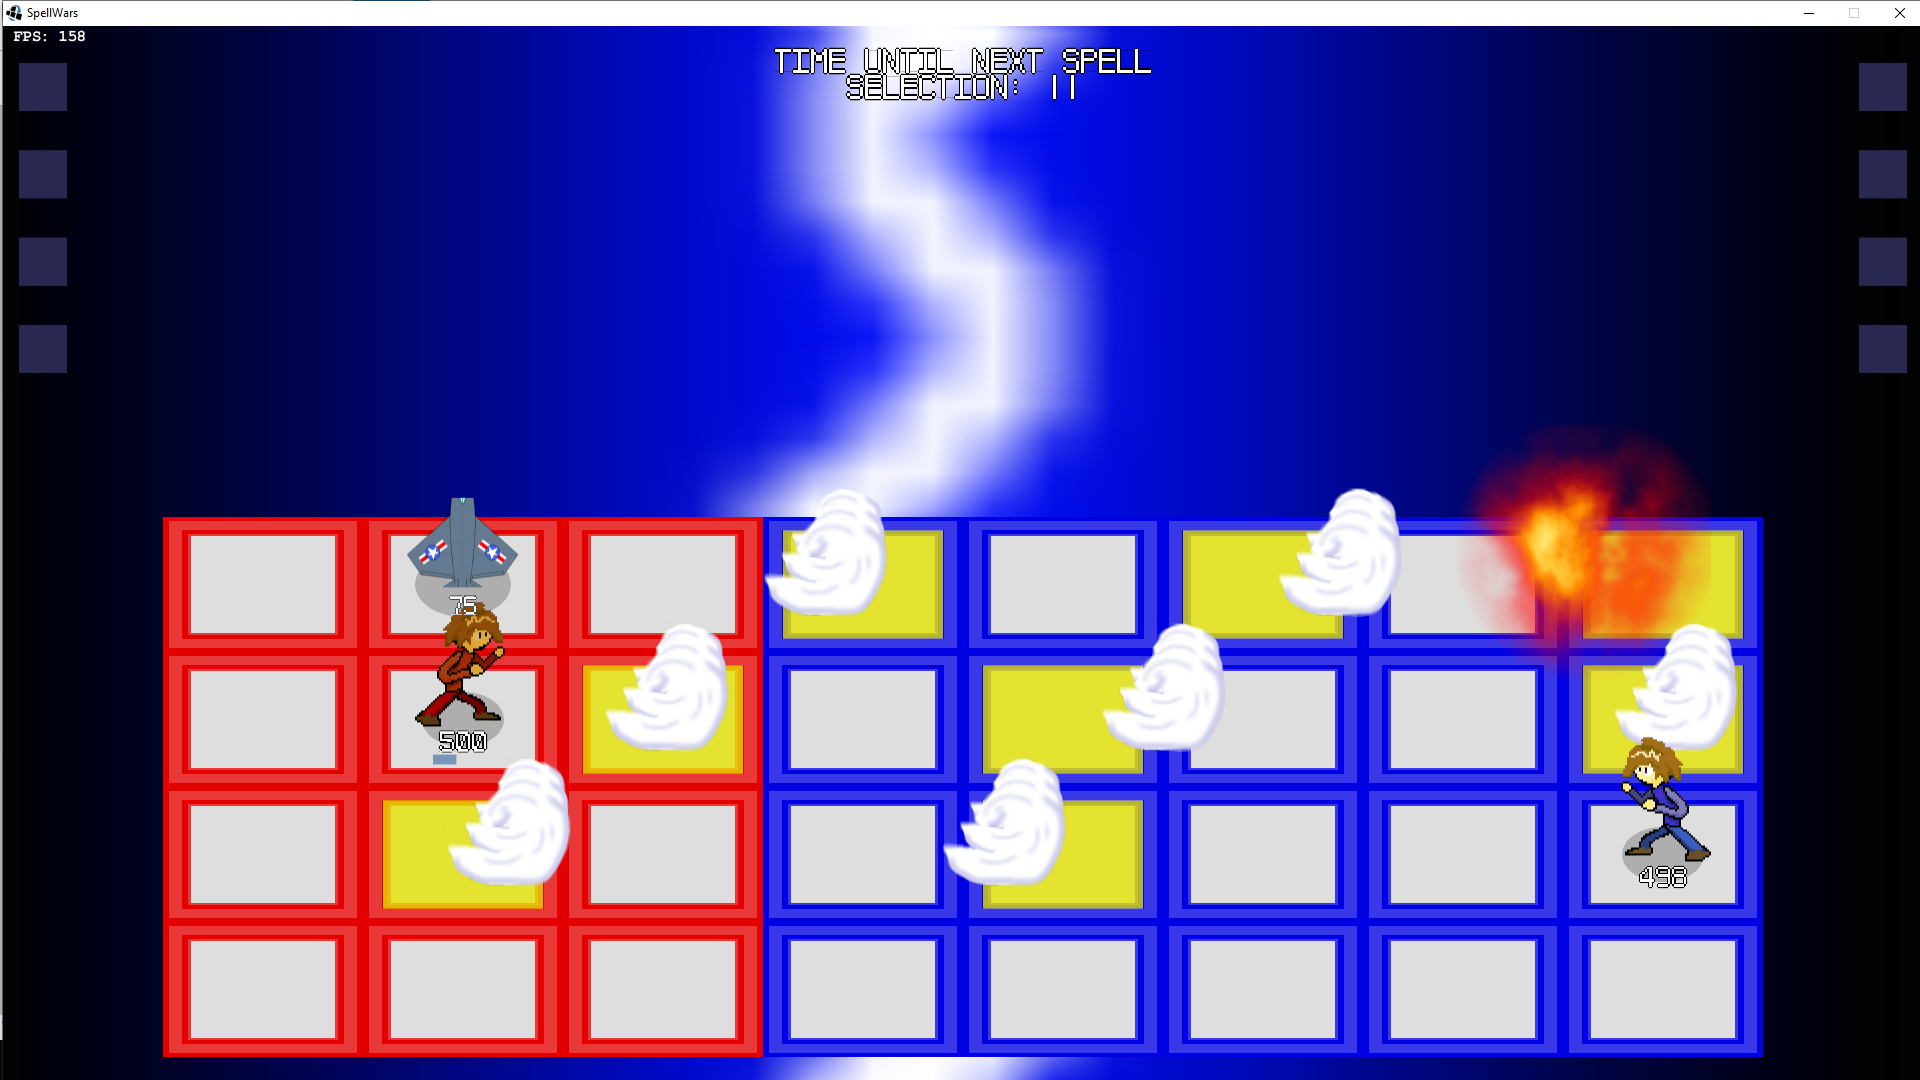 Players casting spells. The blue player also stole a column of
        panels from the red player.